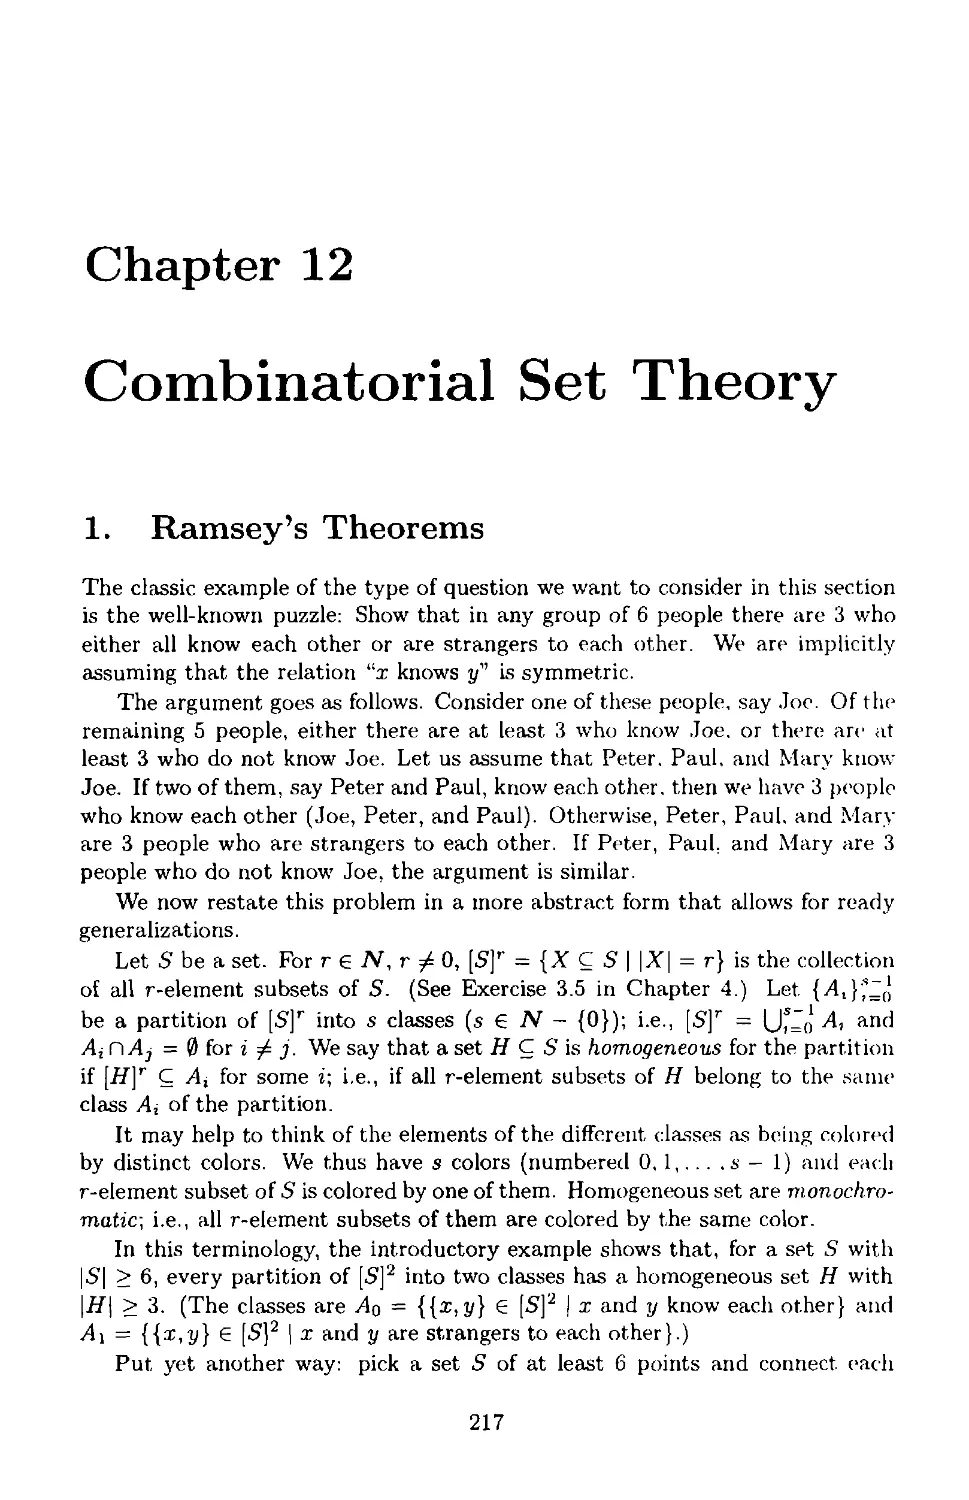 Chapter 12 Combinatorial Set Theory